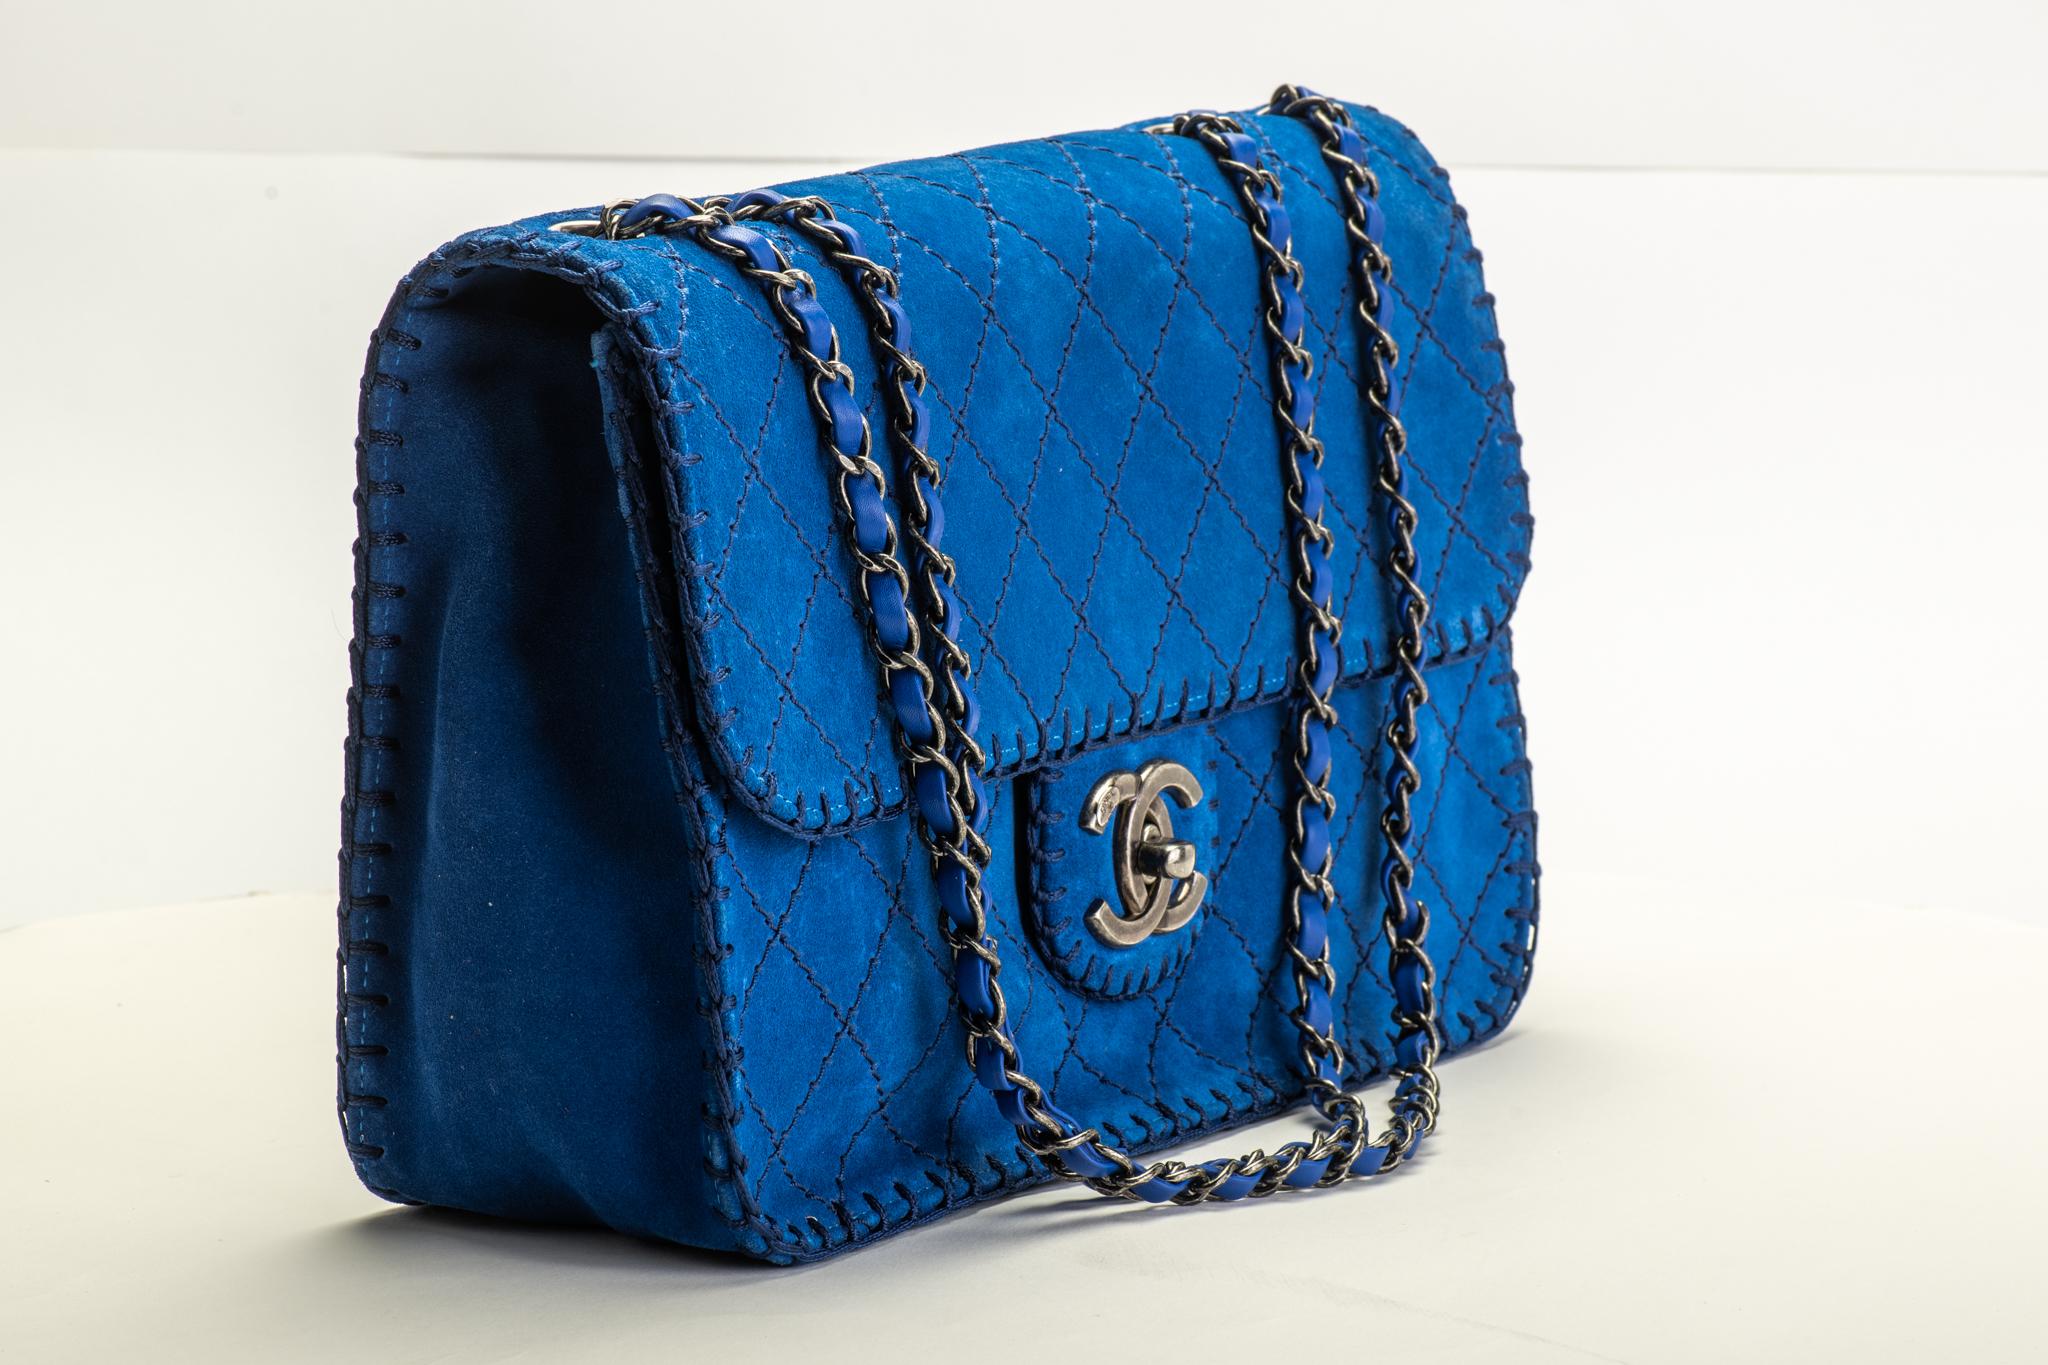 Chanel jumbo single-flap bag in electric blue suede with thick stitching trim and ruthenium hardware. Shoulder drop, 8